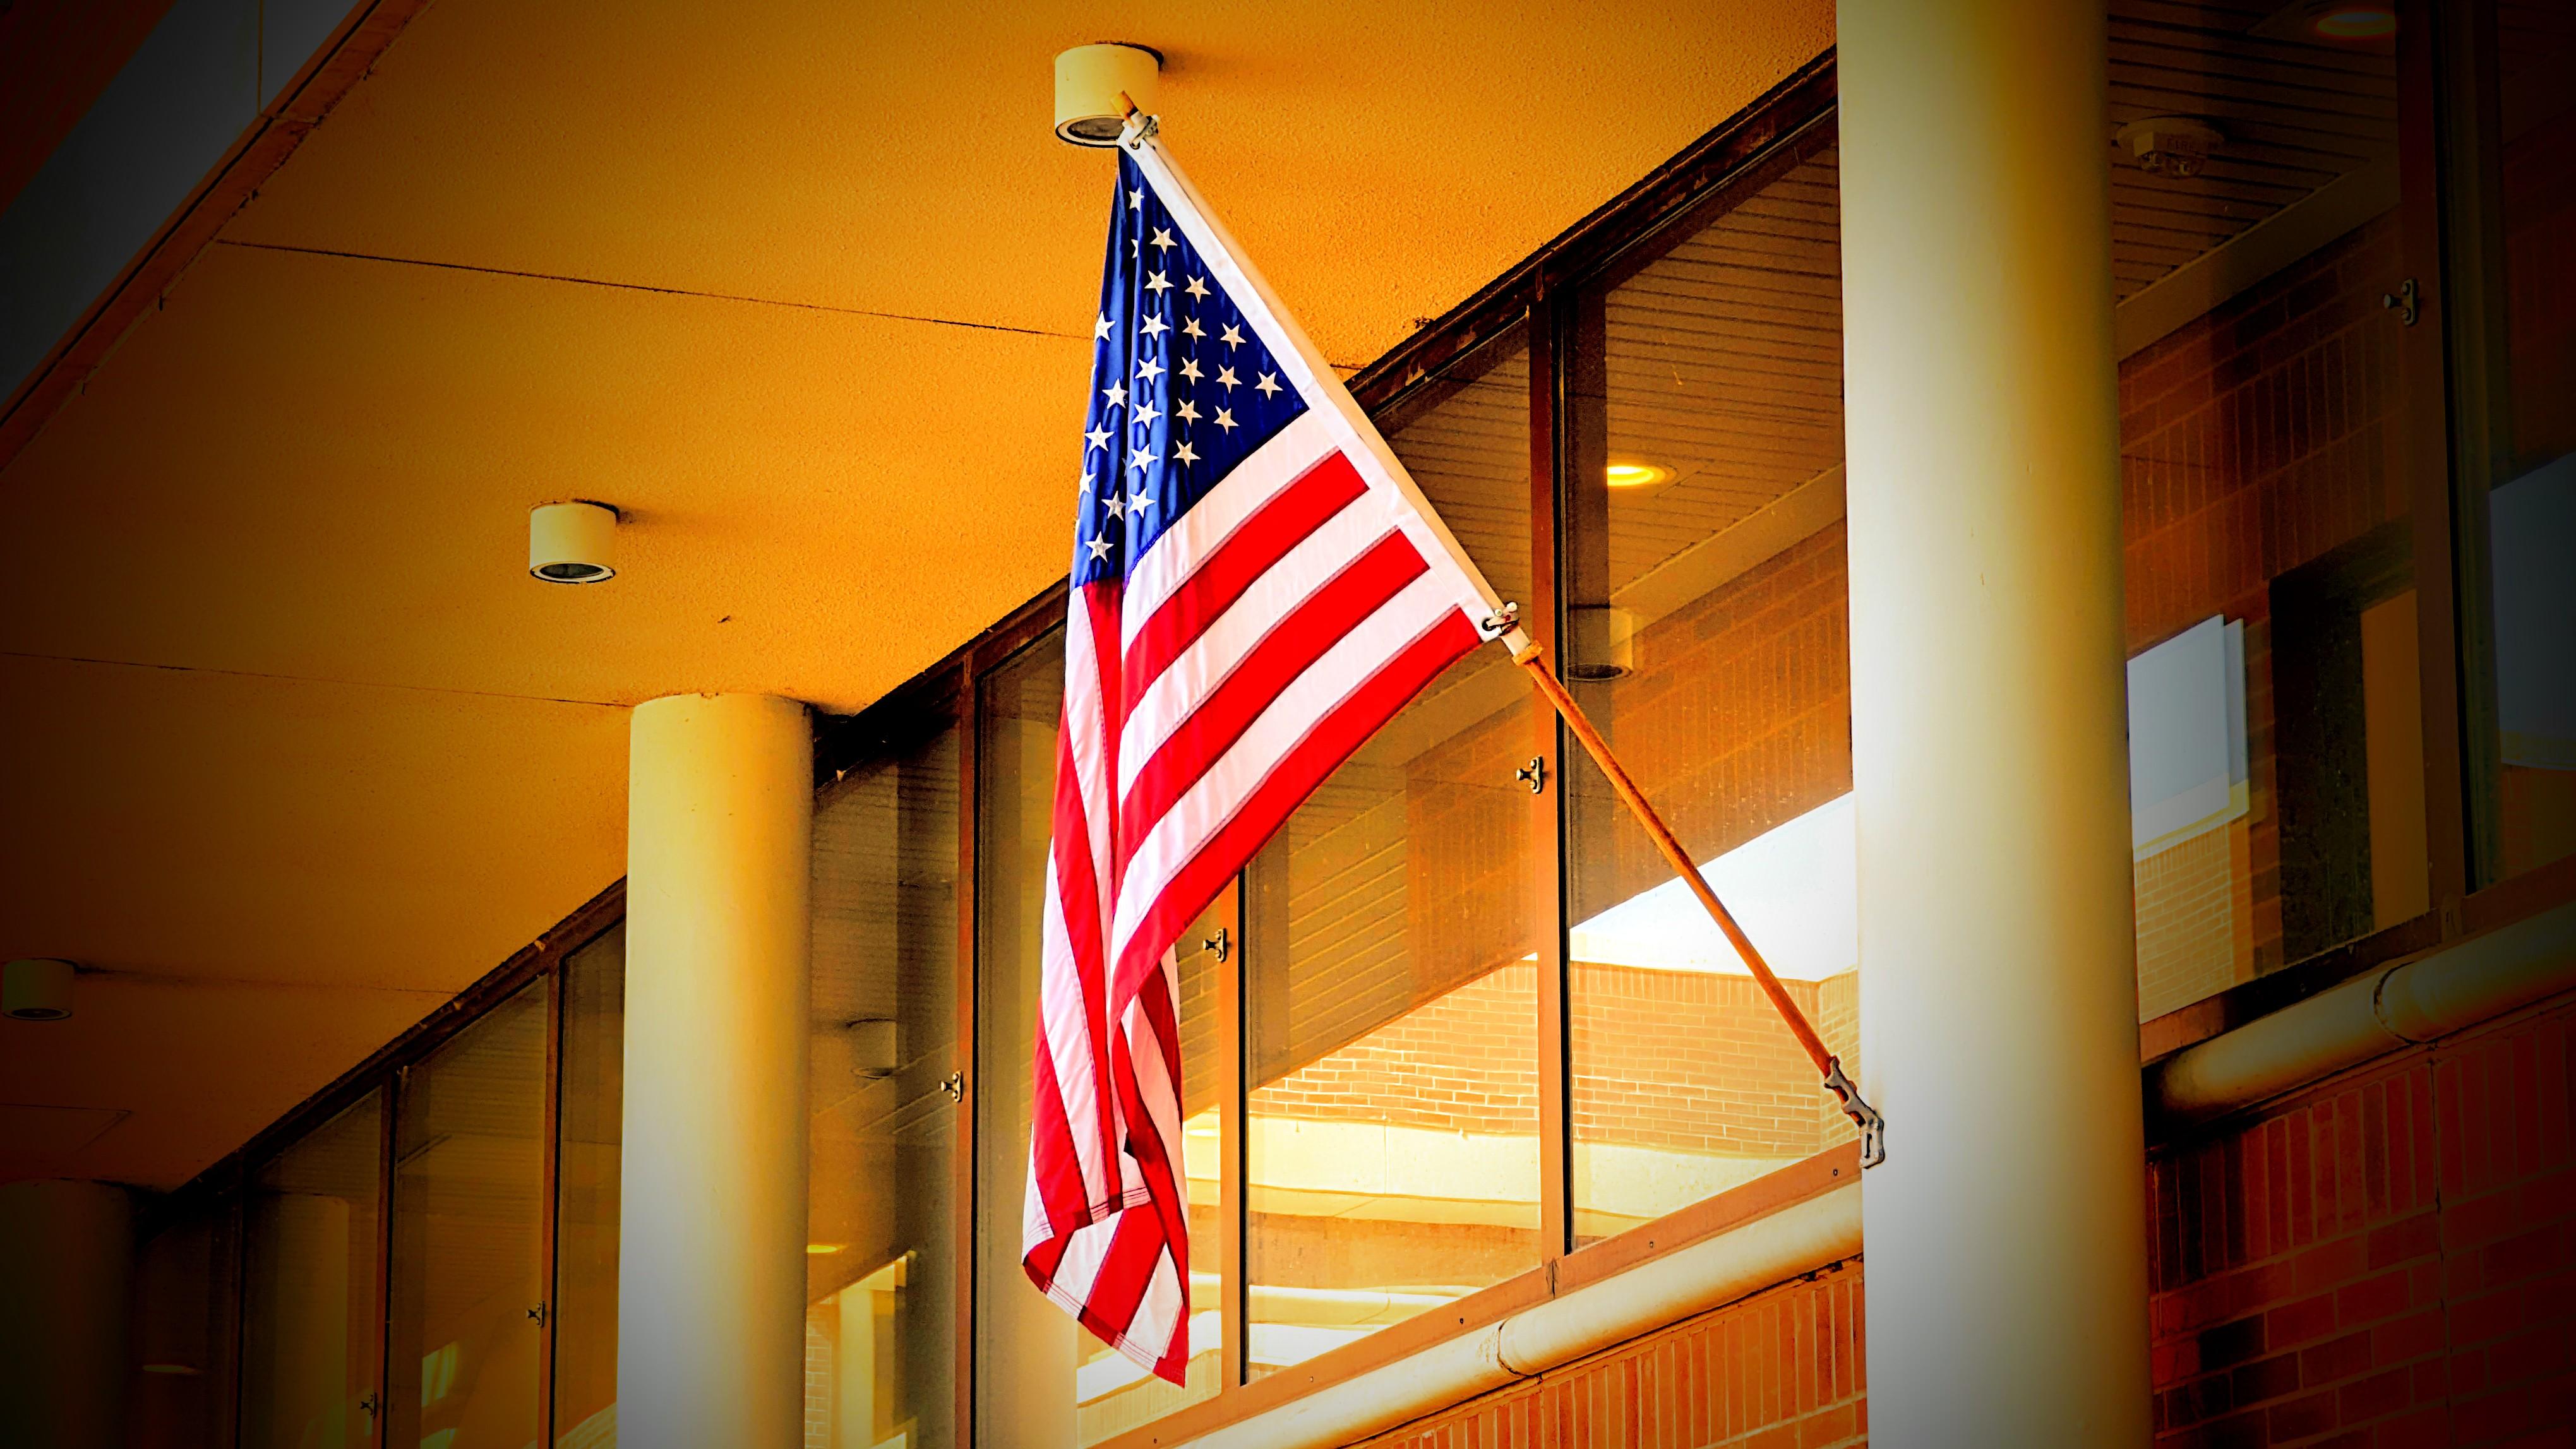 A photograph of an American flag on the front of an office building.